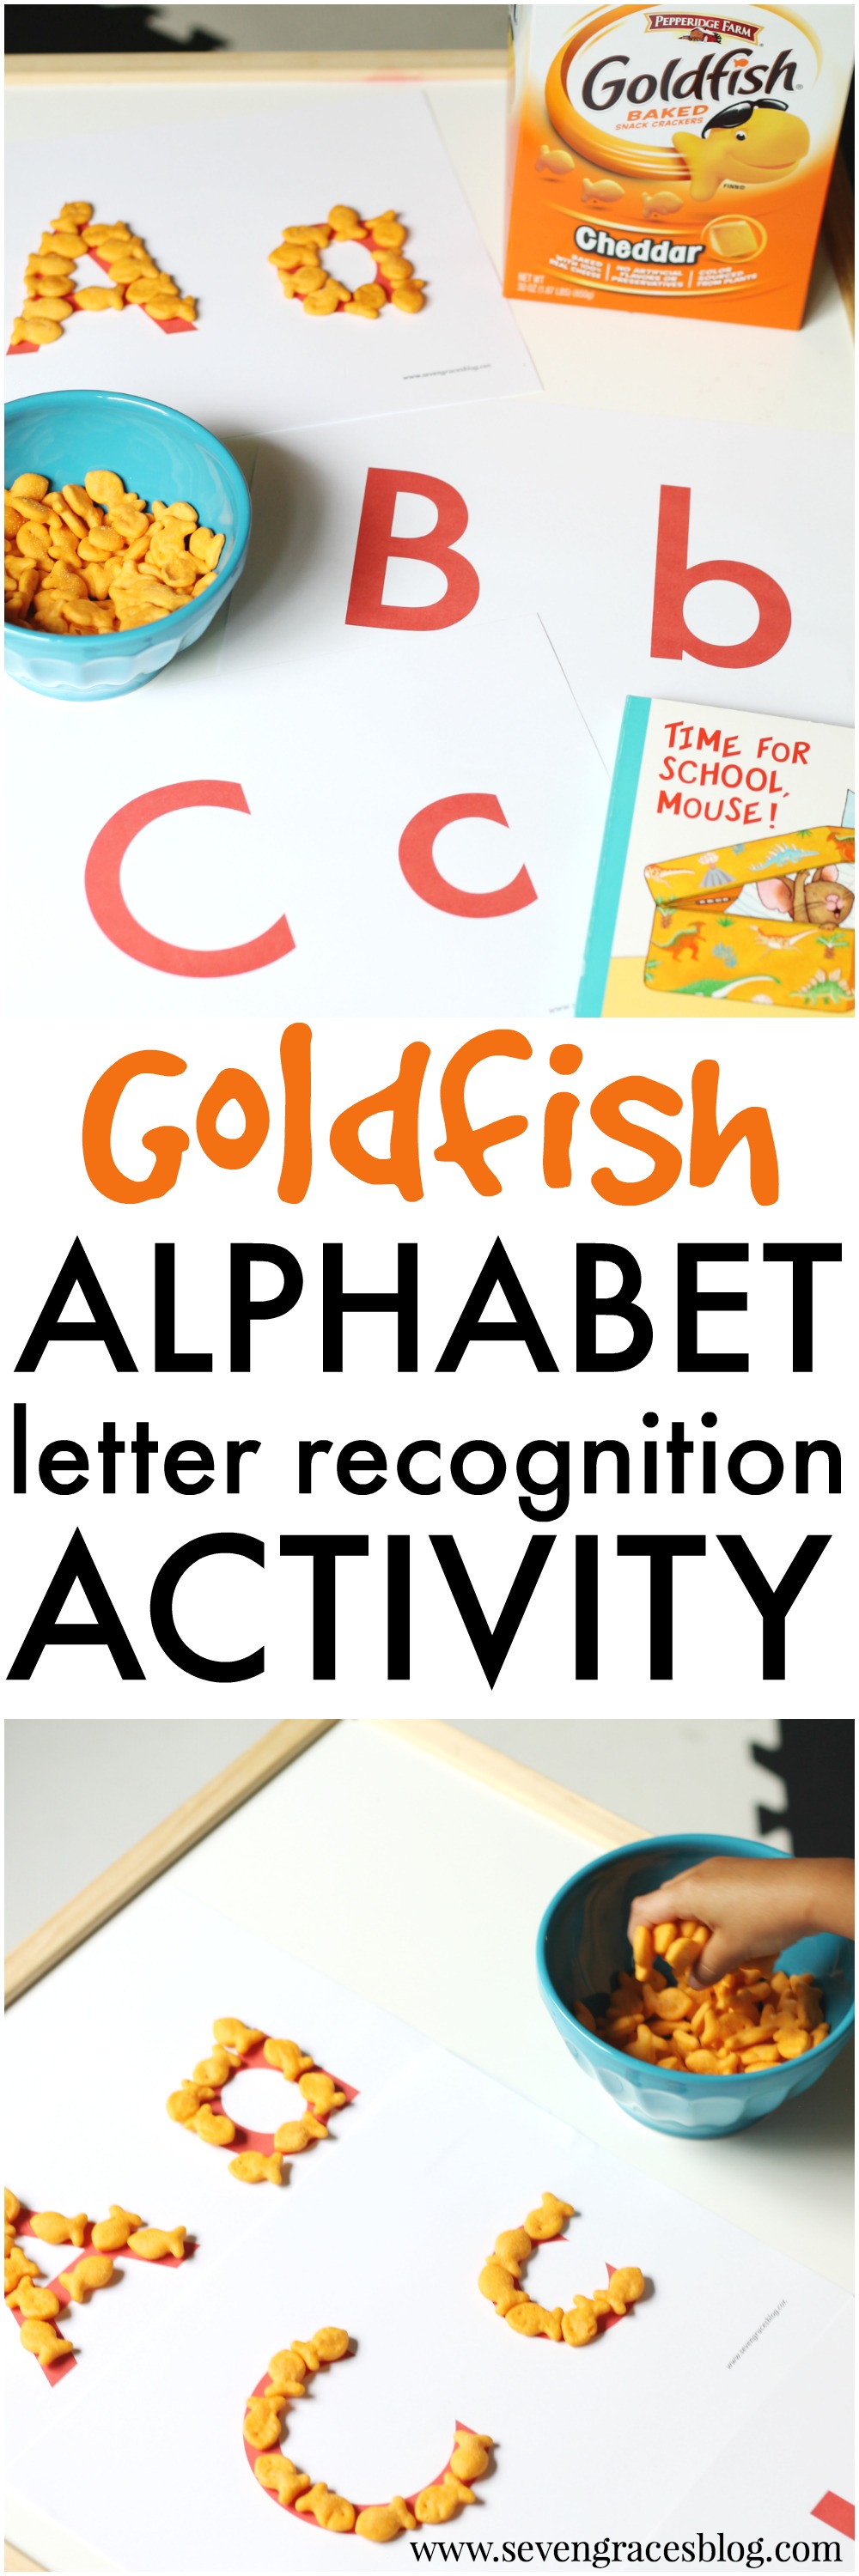 The best letter recognition activity for your preschooler using Goldfish crackers! This is a must try, and it includes a free printable of the alphabets. This free alphabet printable + great preschool activity is a winner.